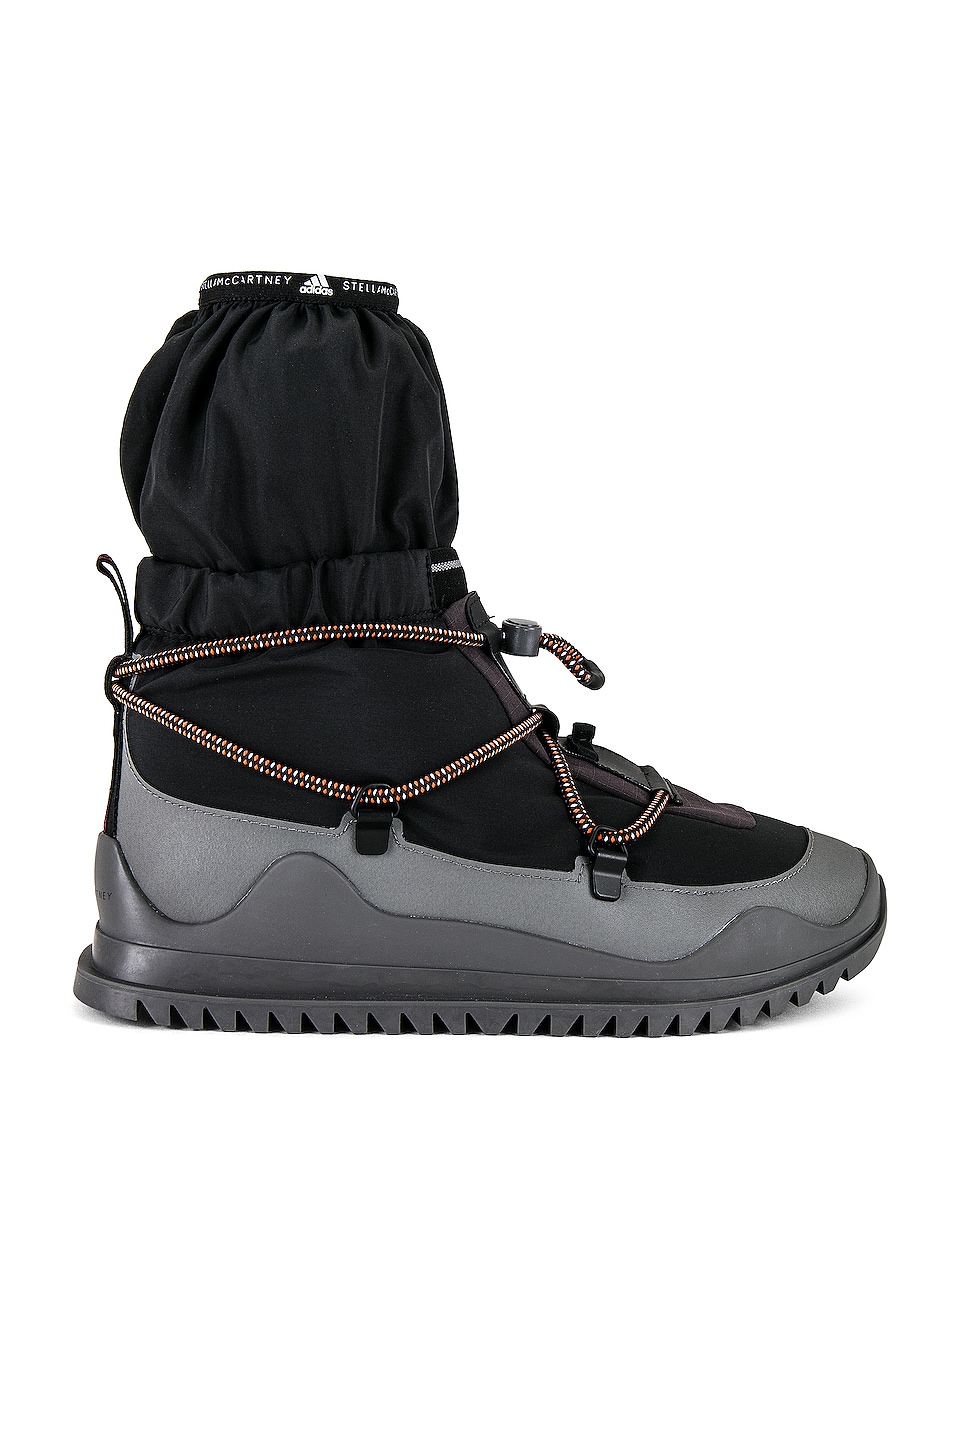 Ботинки adidas by Stella McCartney Winter Cold.rdy, цвет Core Black, Grey Four & Active Orange four points by sheraton downtown